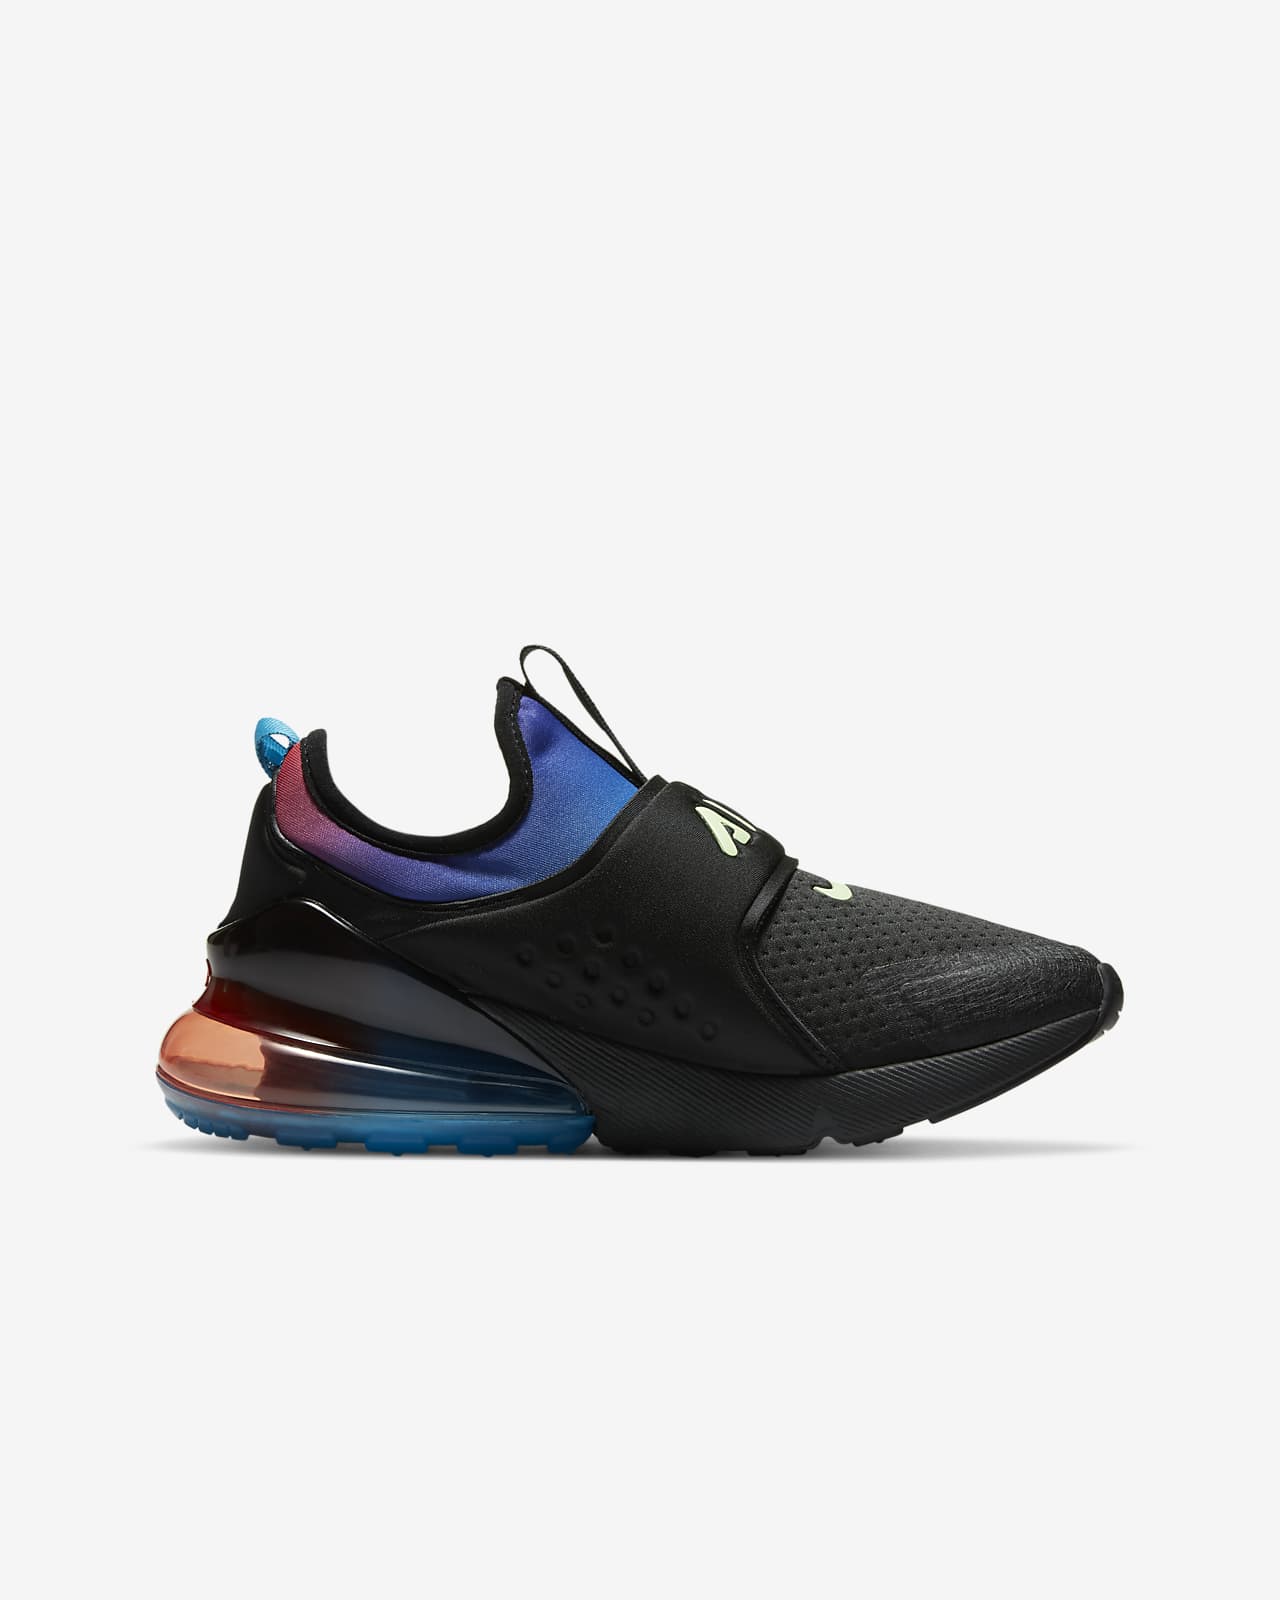 nike air max 270 extreme little kids